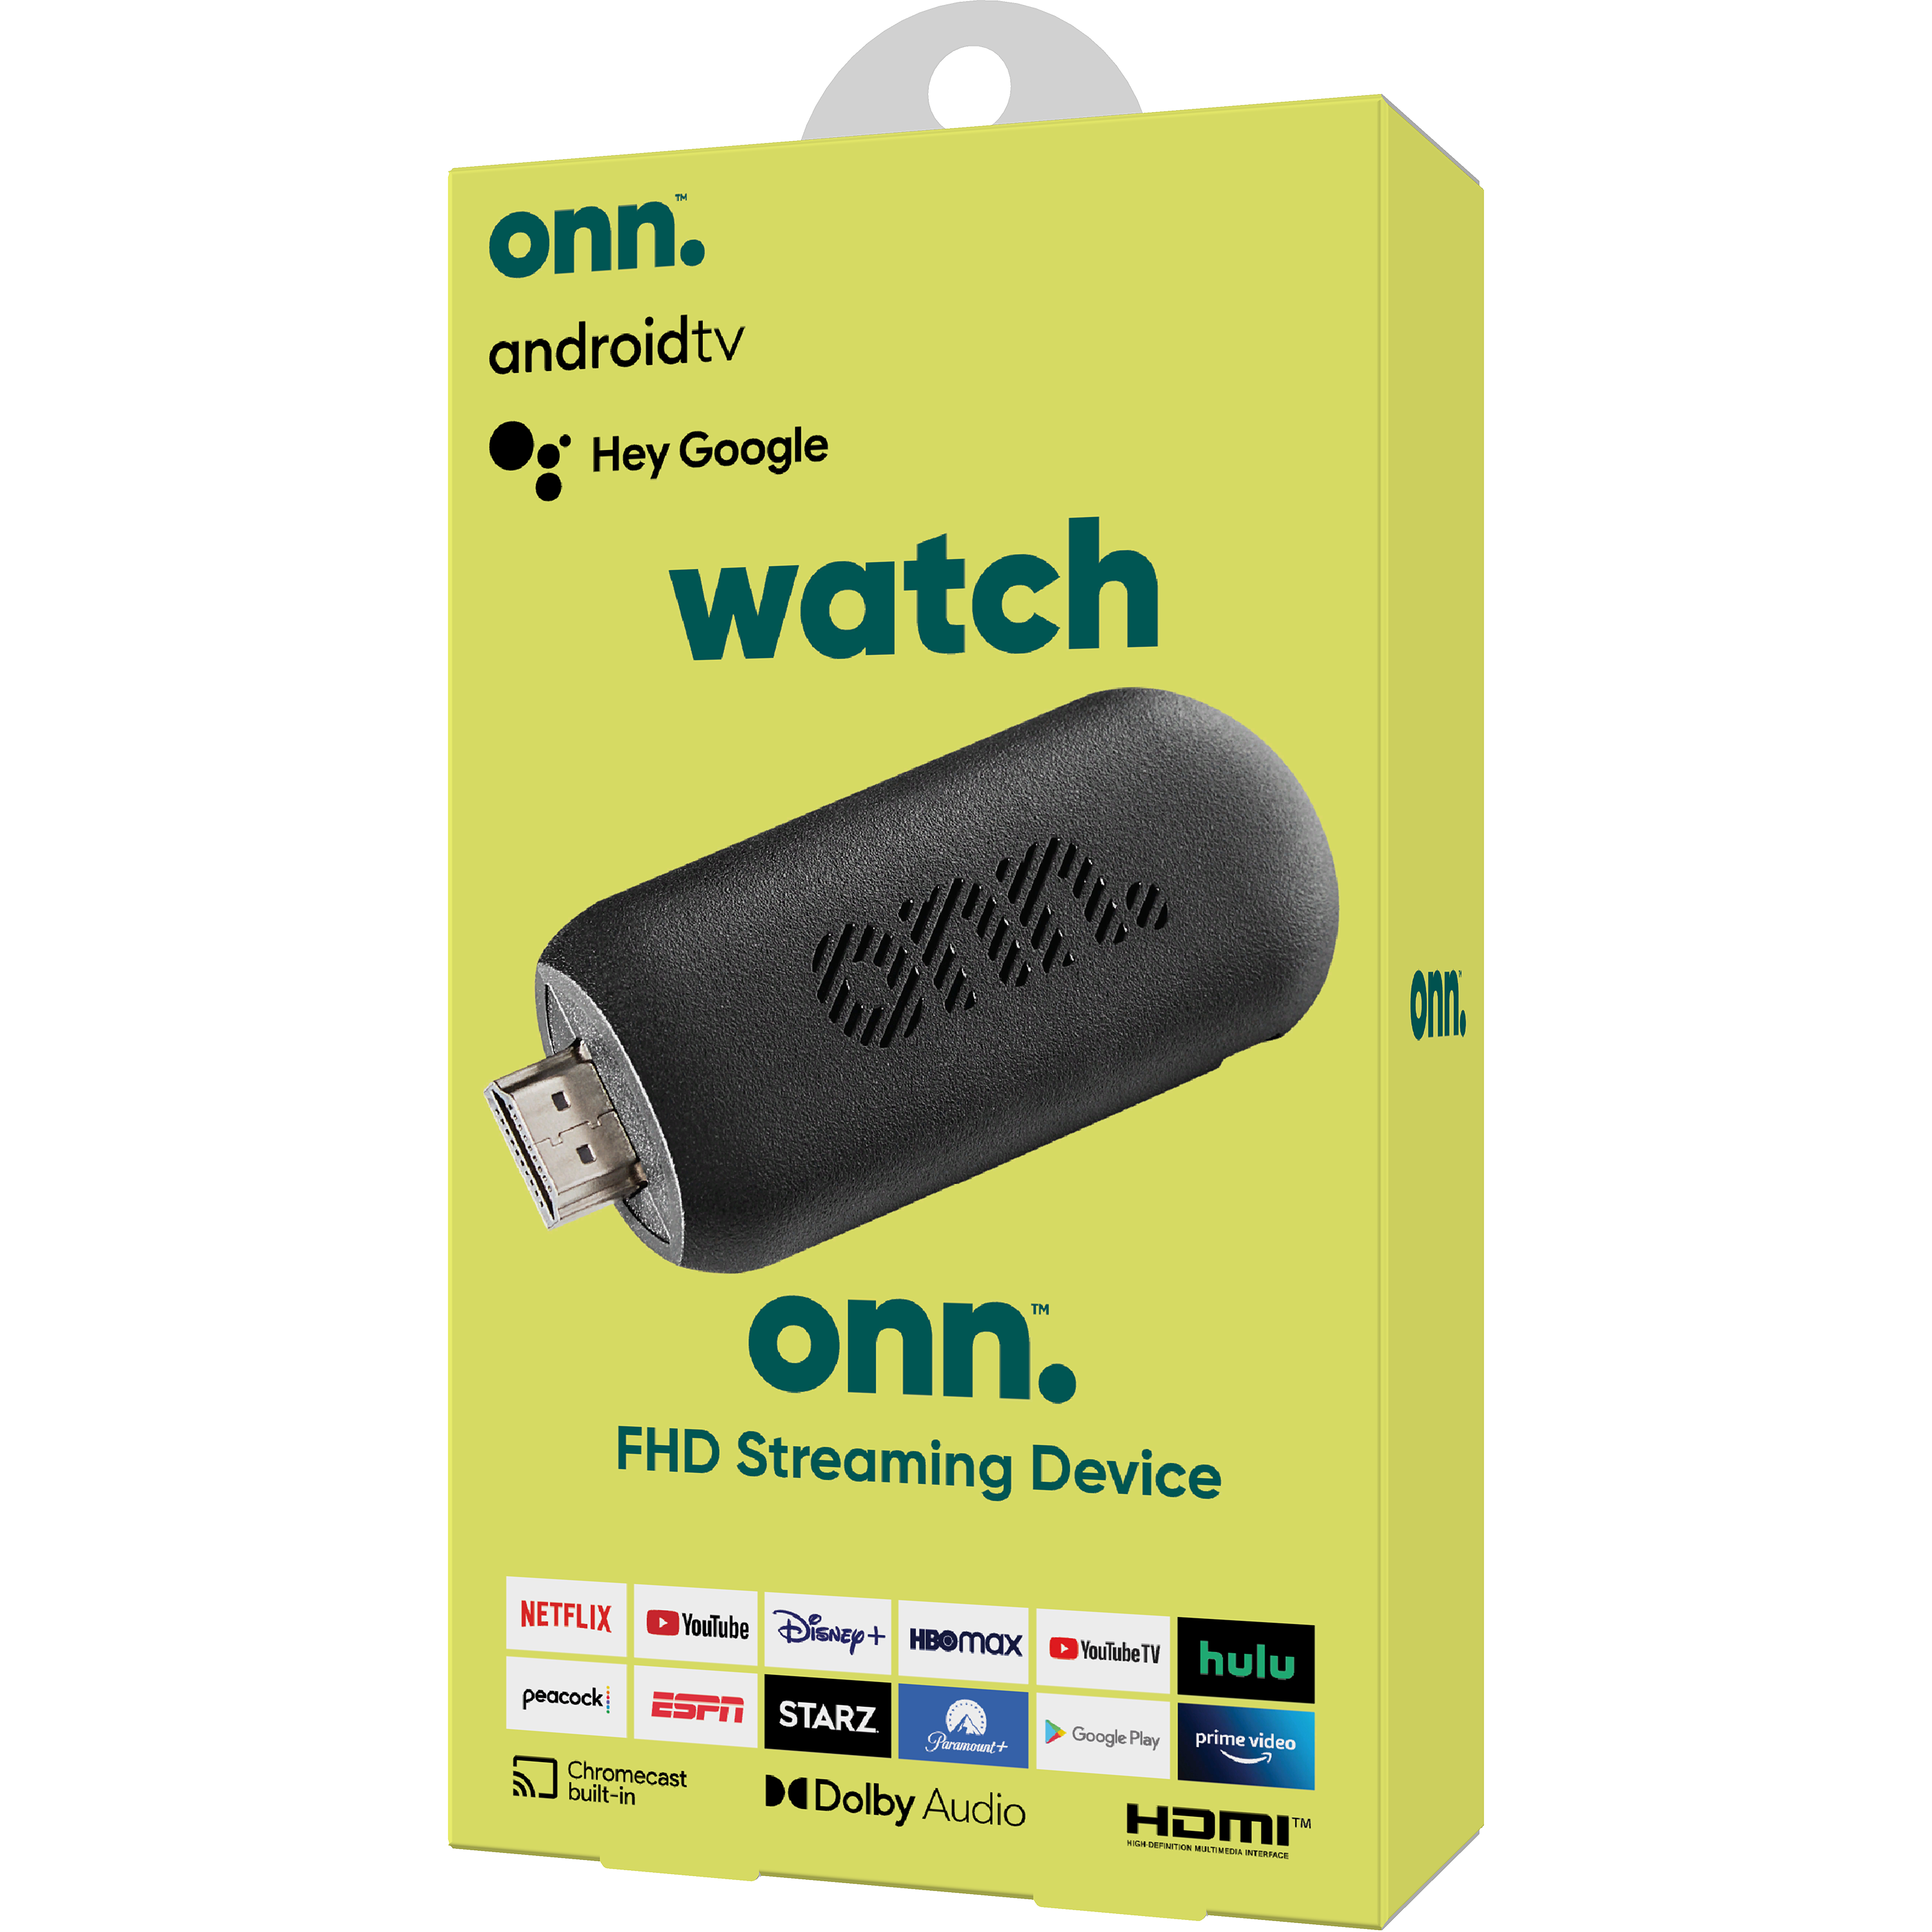 onn. Android TV 2K FHD Streaming Stick with Remote Control & Power Adapter - image 12 of 14